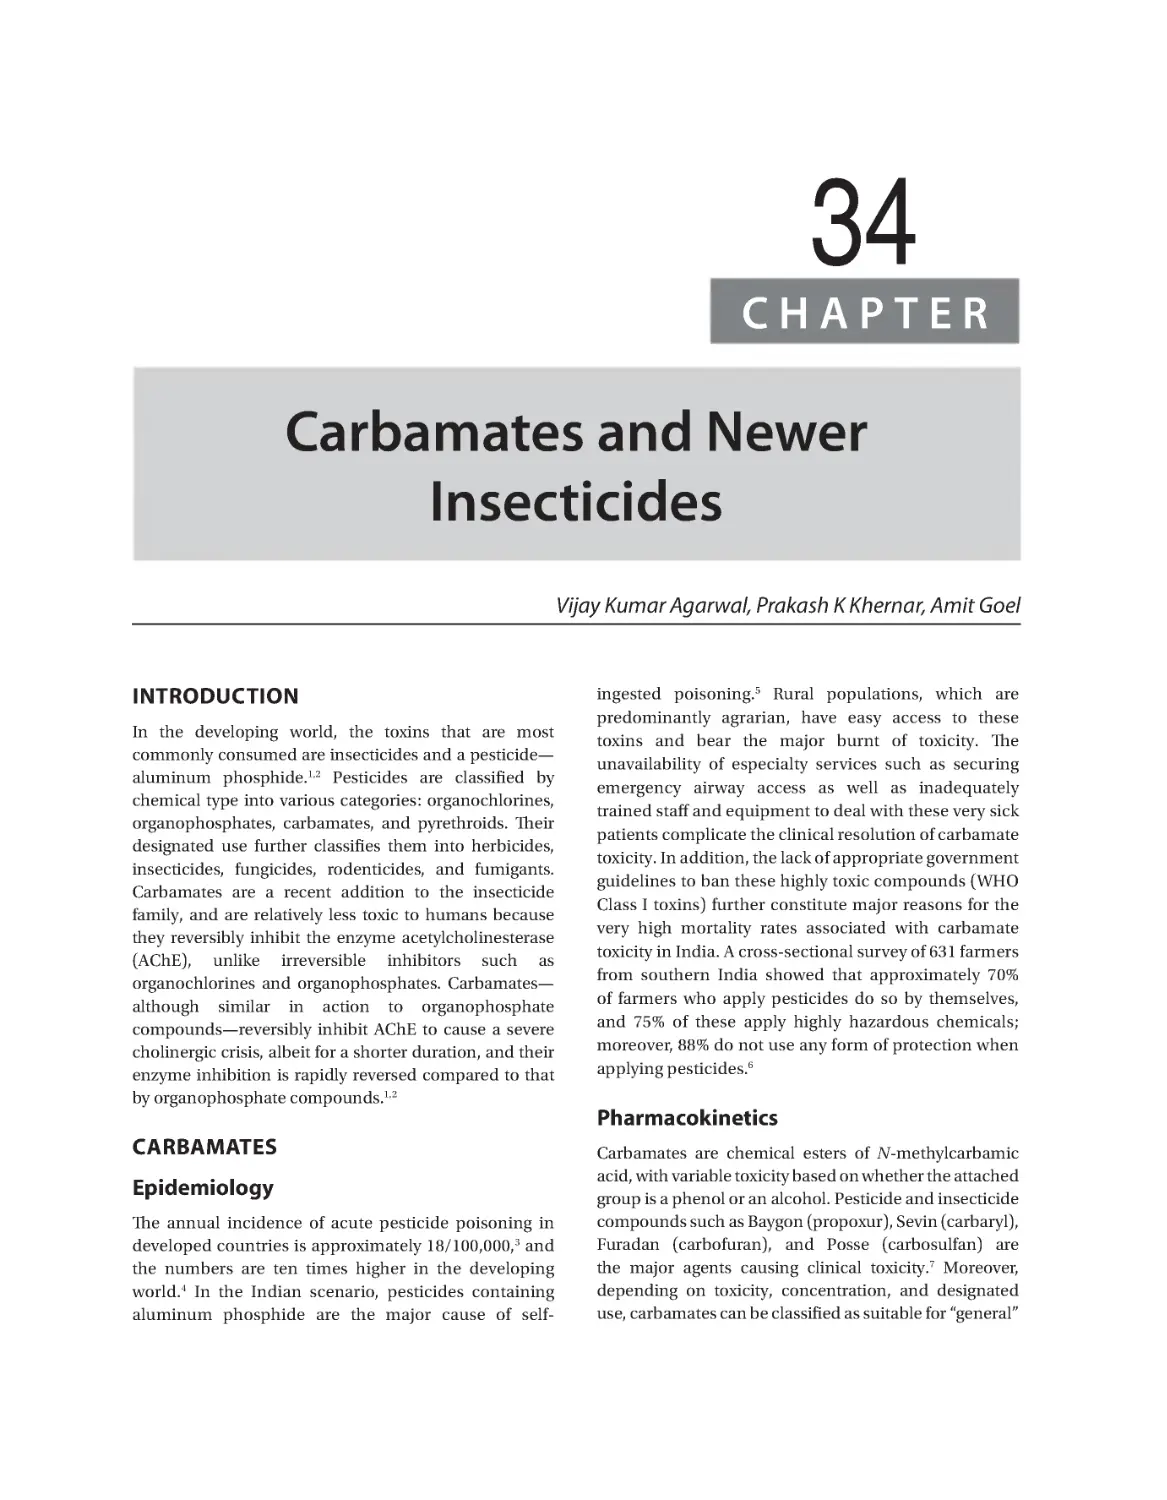 Chapter 34: Carbamates and Newer Insecticides